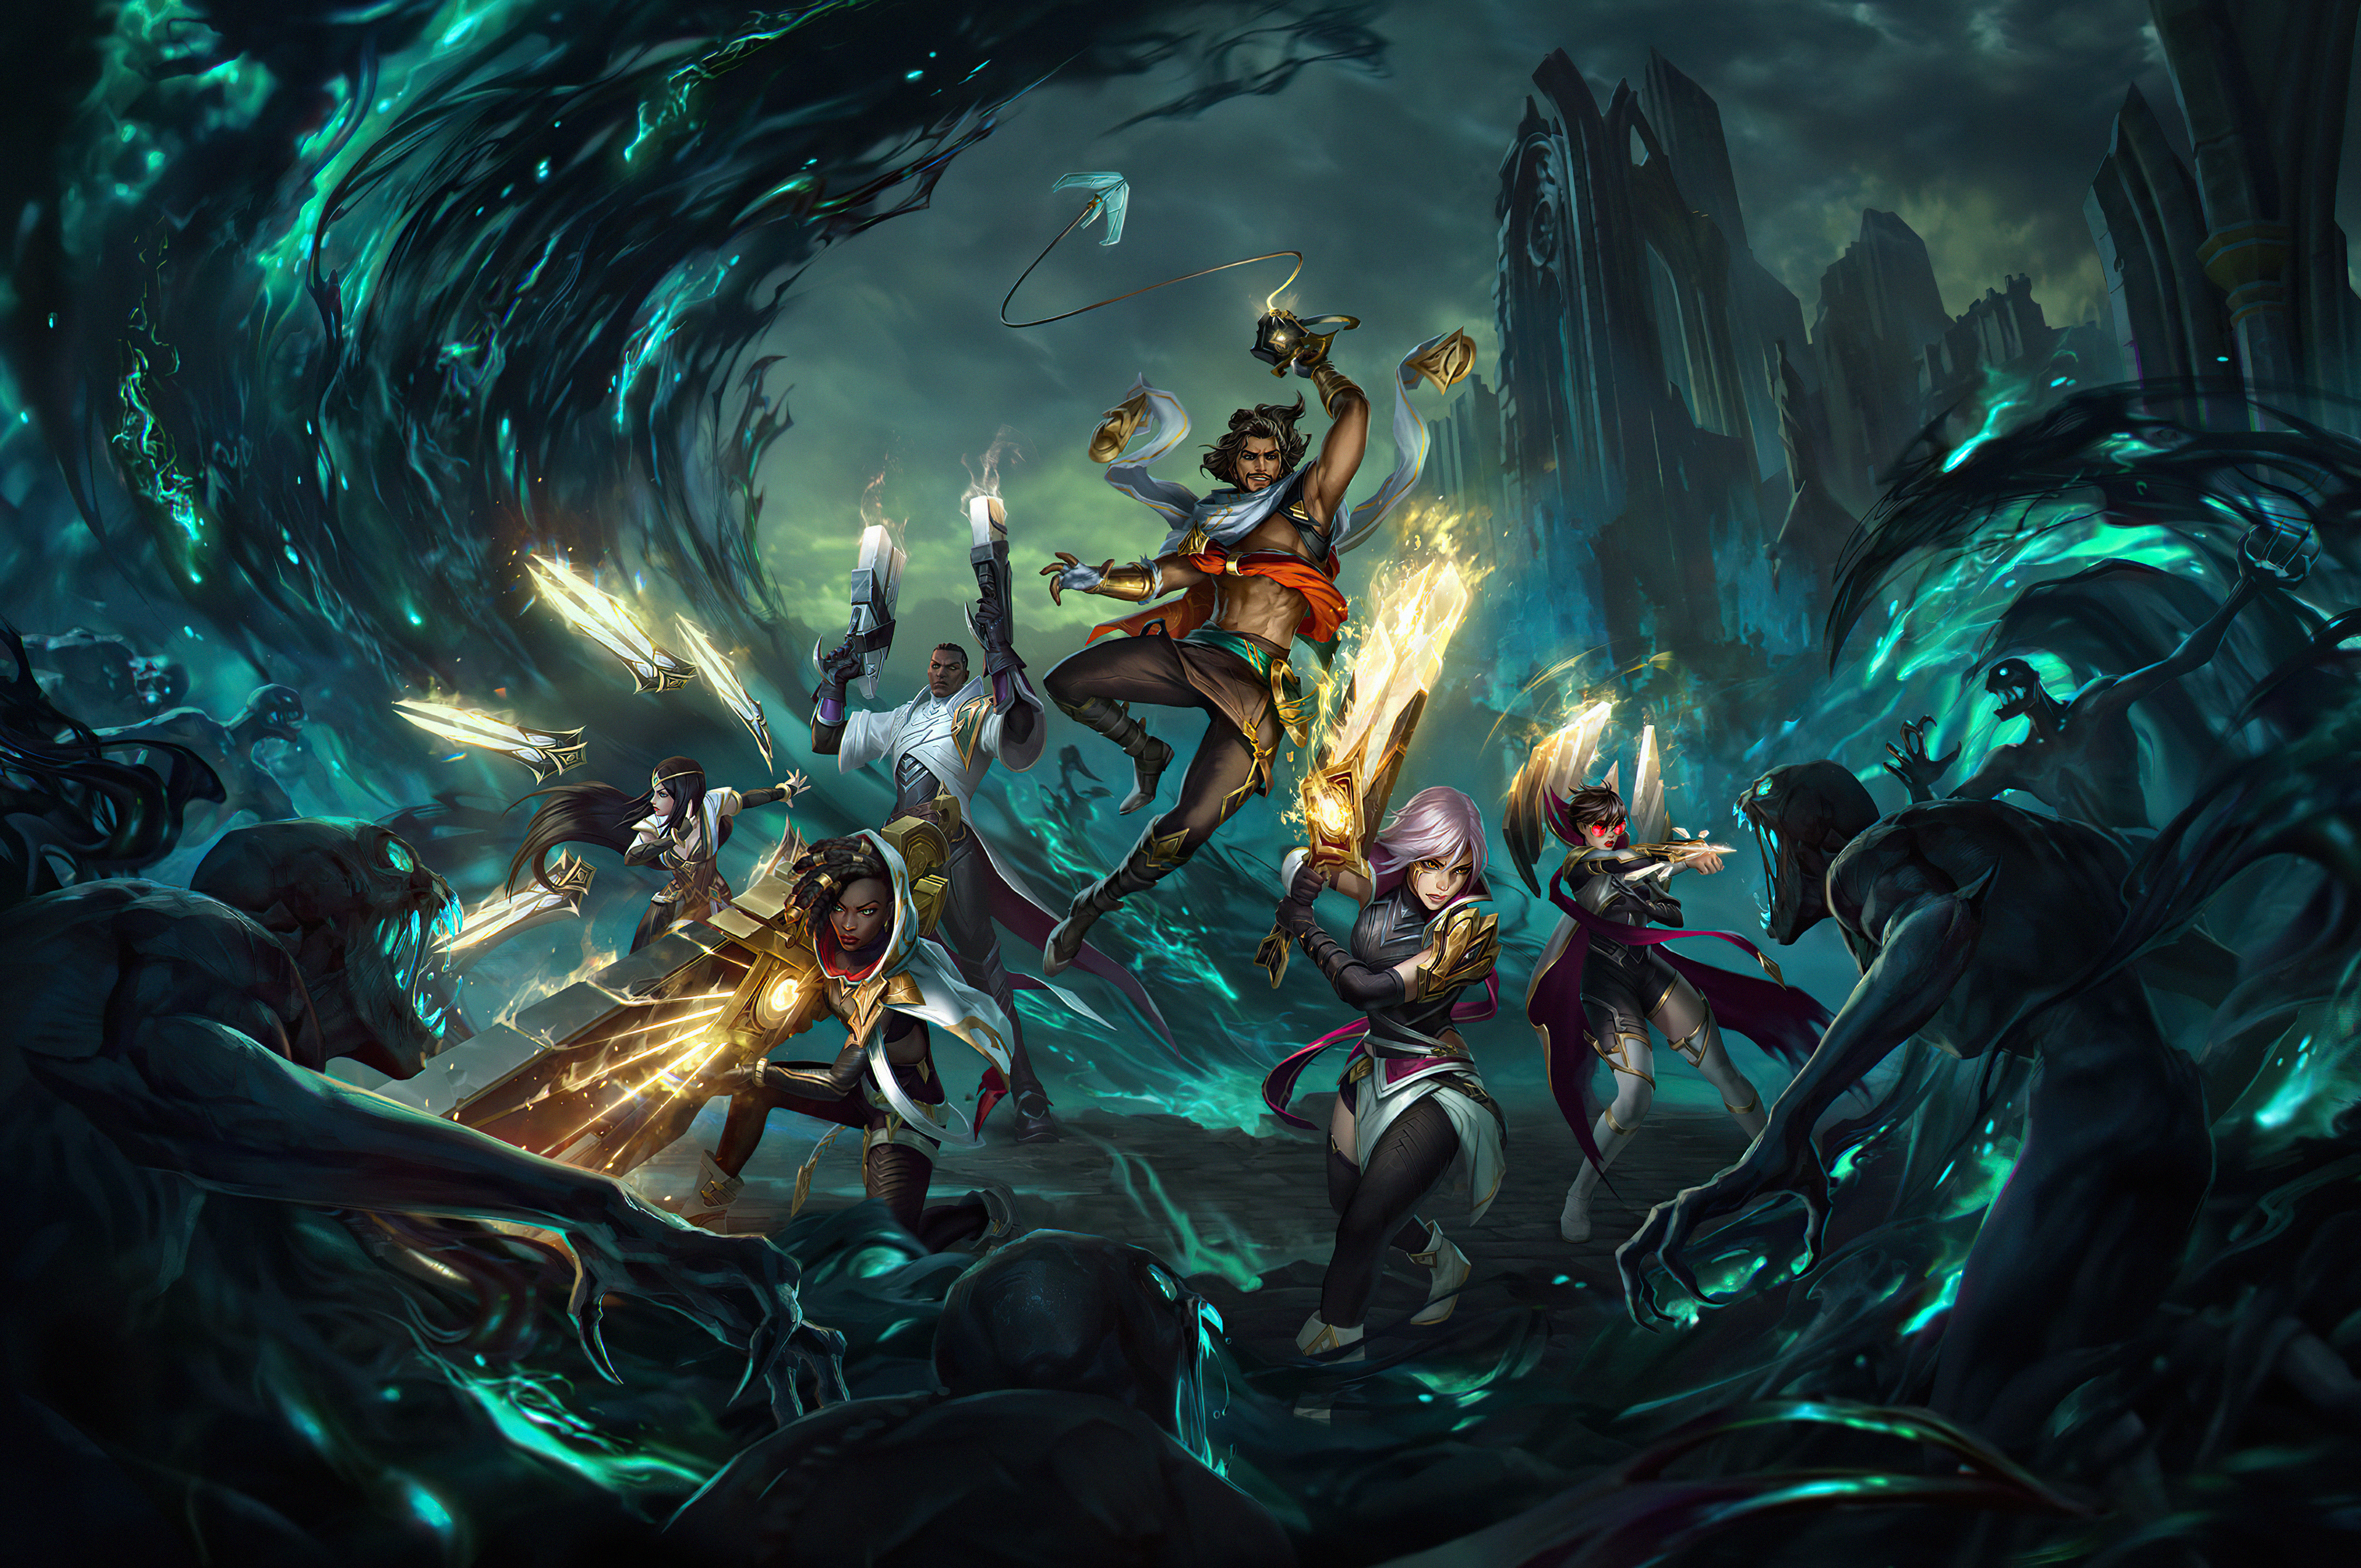 The best League of Legends: Wild Rift wallpapers for PC and mobile